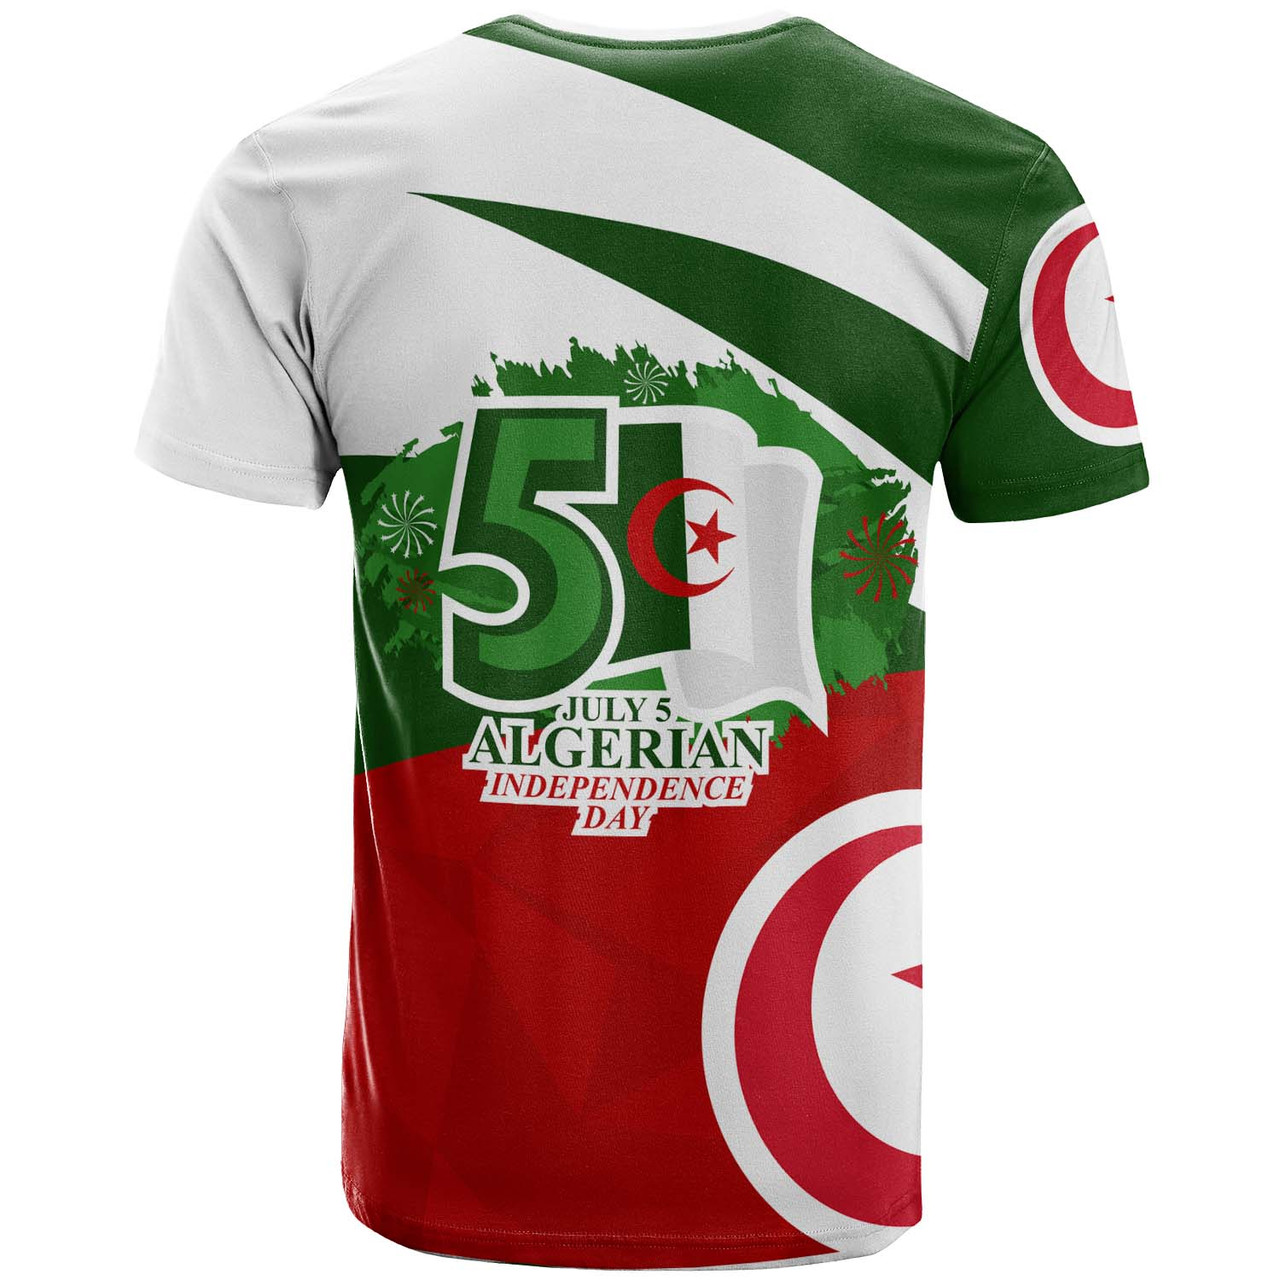 Algeria T-shirt - Algerian Independence Day with Fennec Fox T-shirt